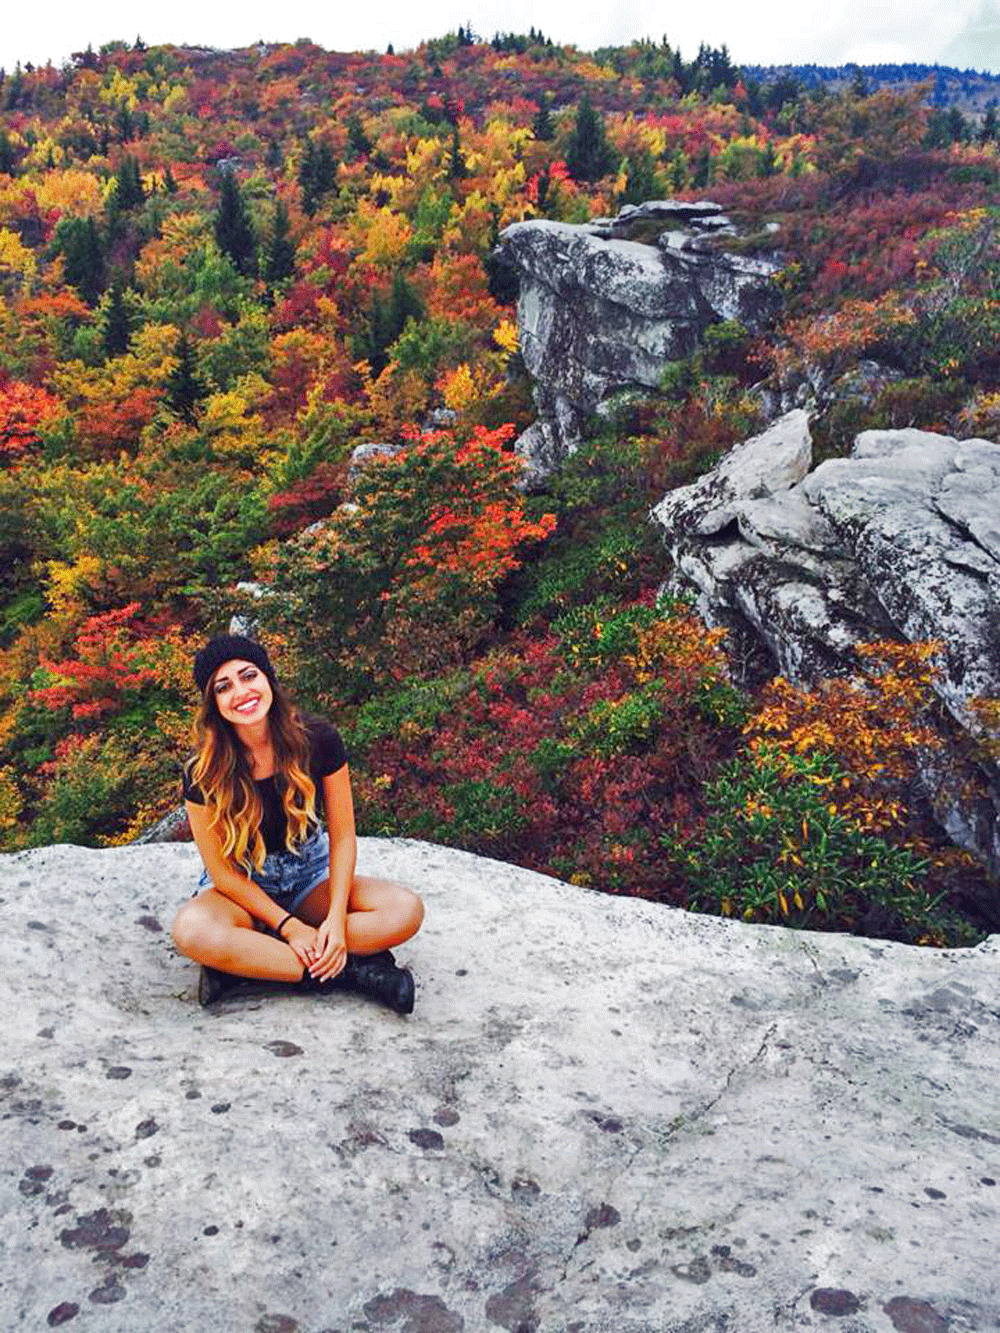 Sophomore+biology+major+Adrianna+Castro+sits+on+a+cliff+at+the+top+of+Rough+Ridge.+The+hike+at+Rough+Ridge+is+a+favorite+among+several+Appalachian+State+University+students.+Photo+courtesy+of+Nicholas+Lisle